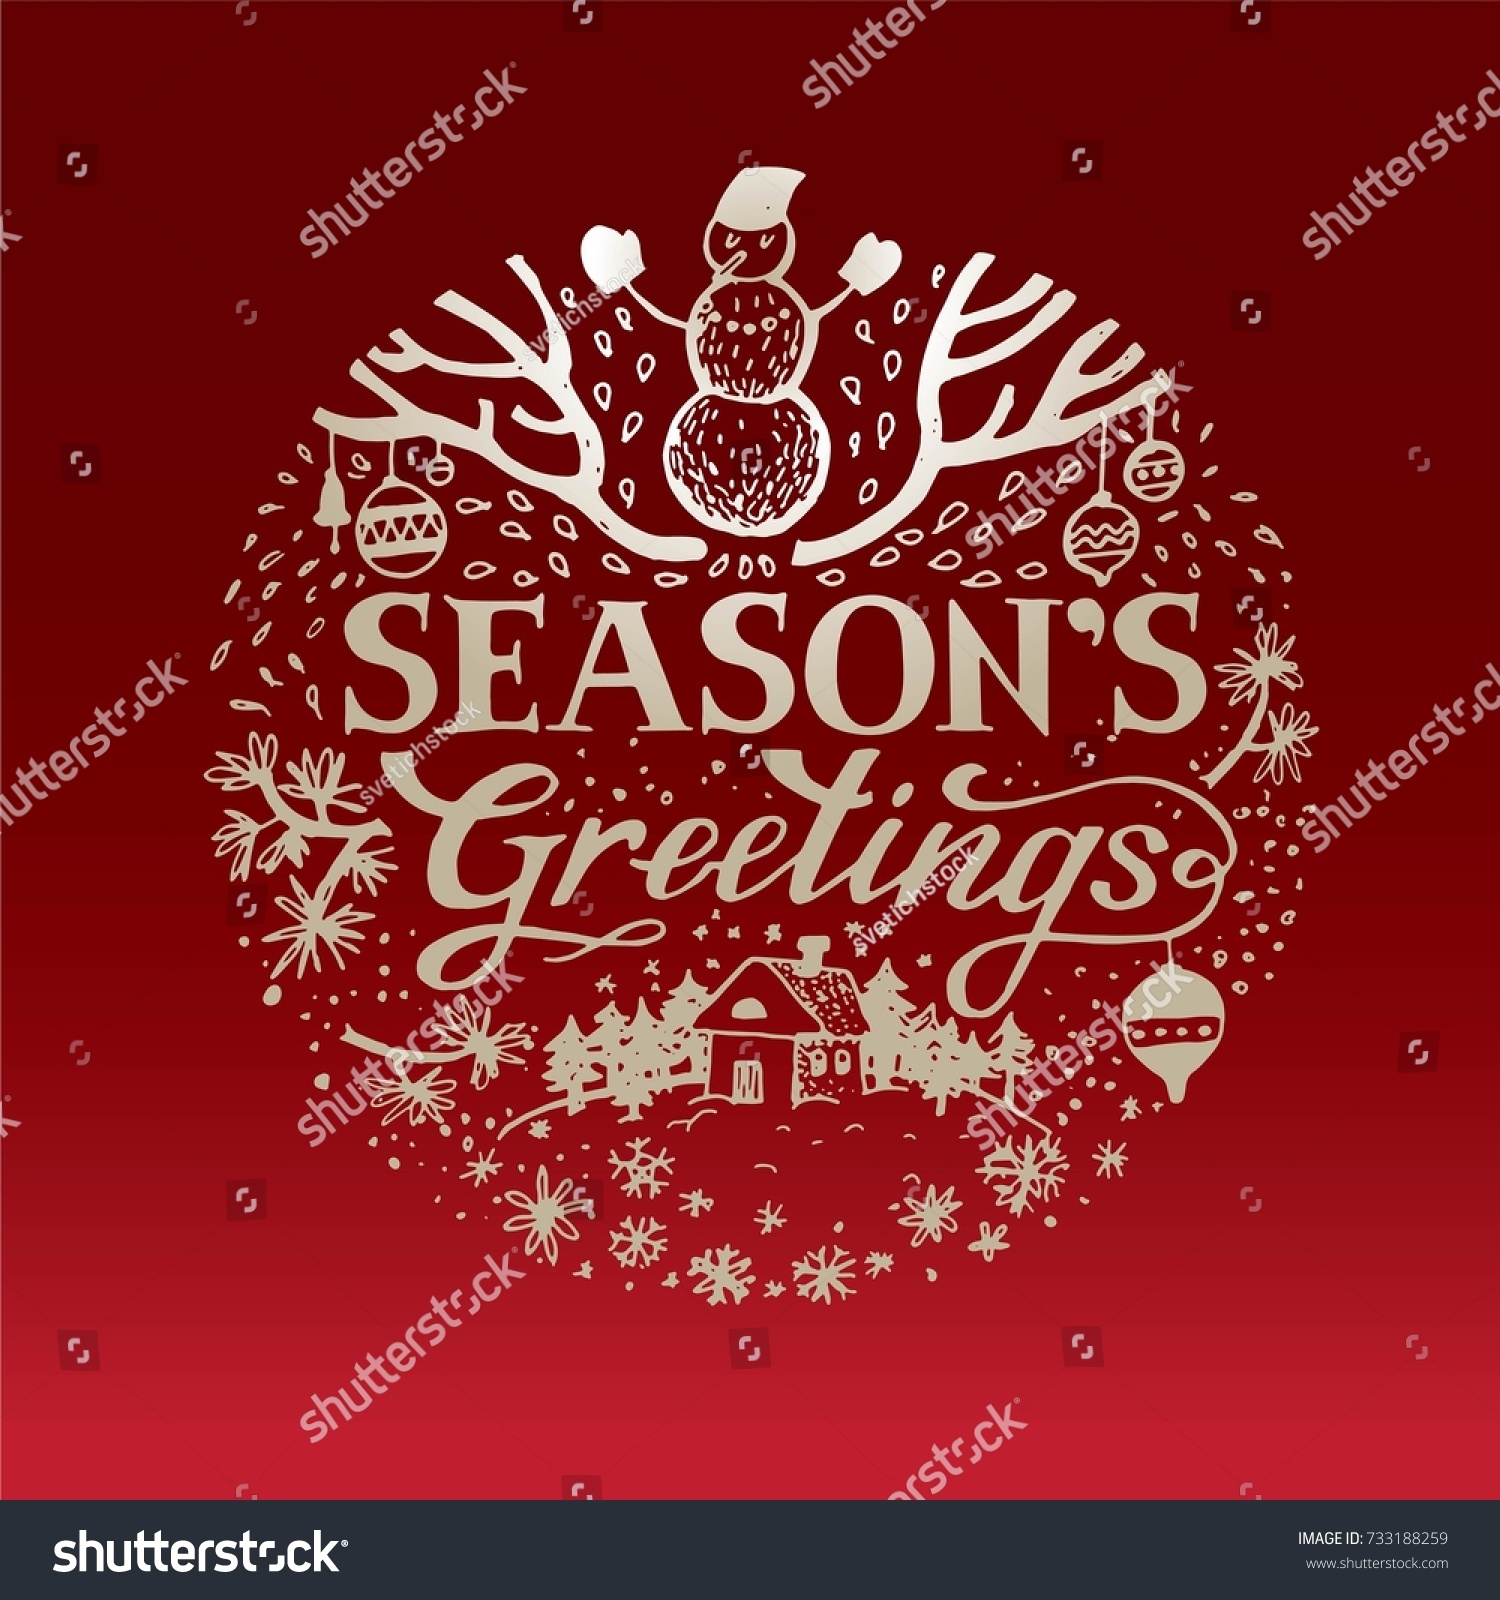 Seasons greetings Lettering and illustration for poster card or invitation House on the meadow